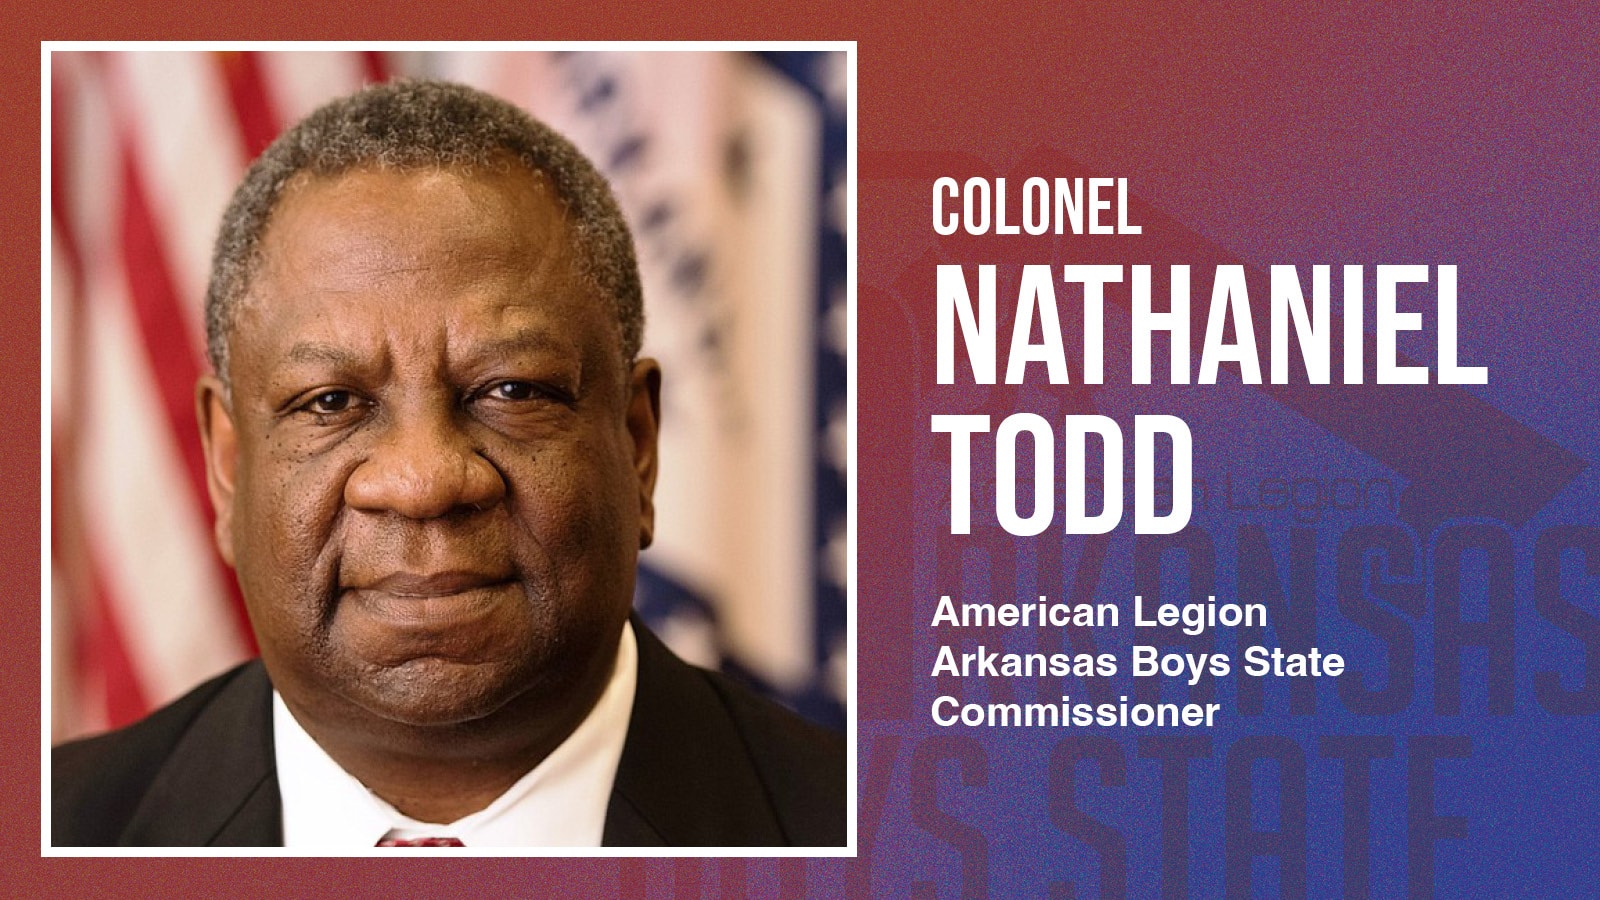 Todd appointed to American Legion Arkansas Boys State Commission